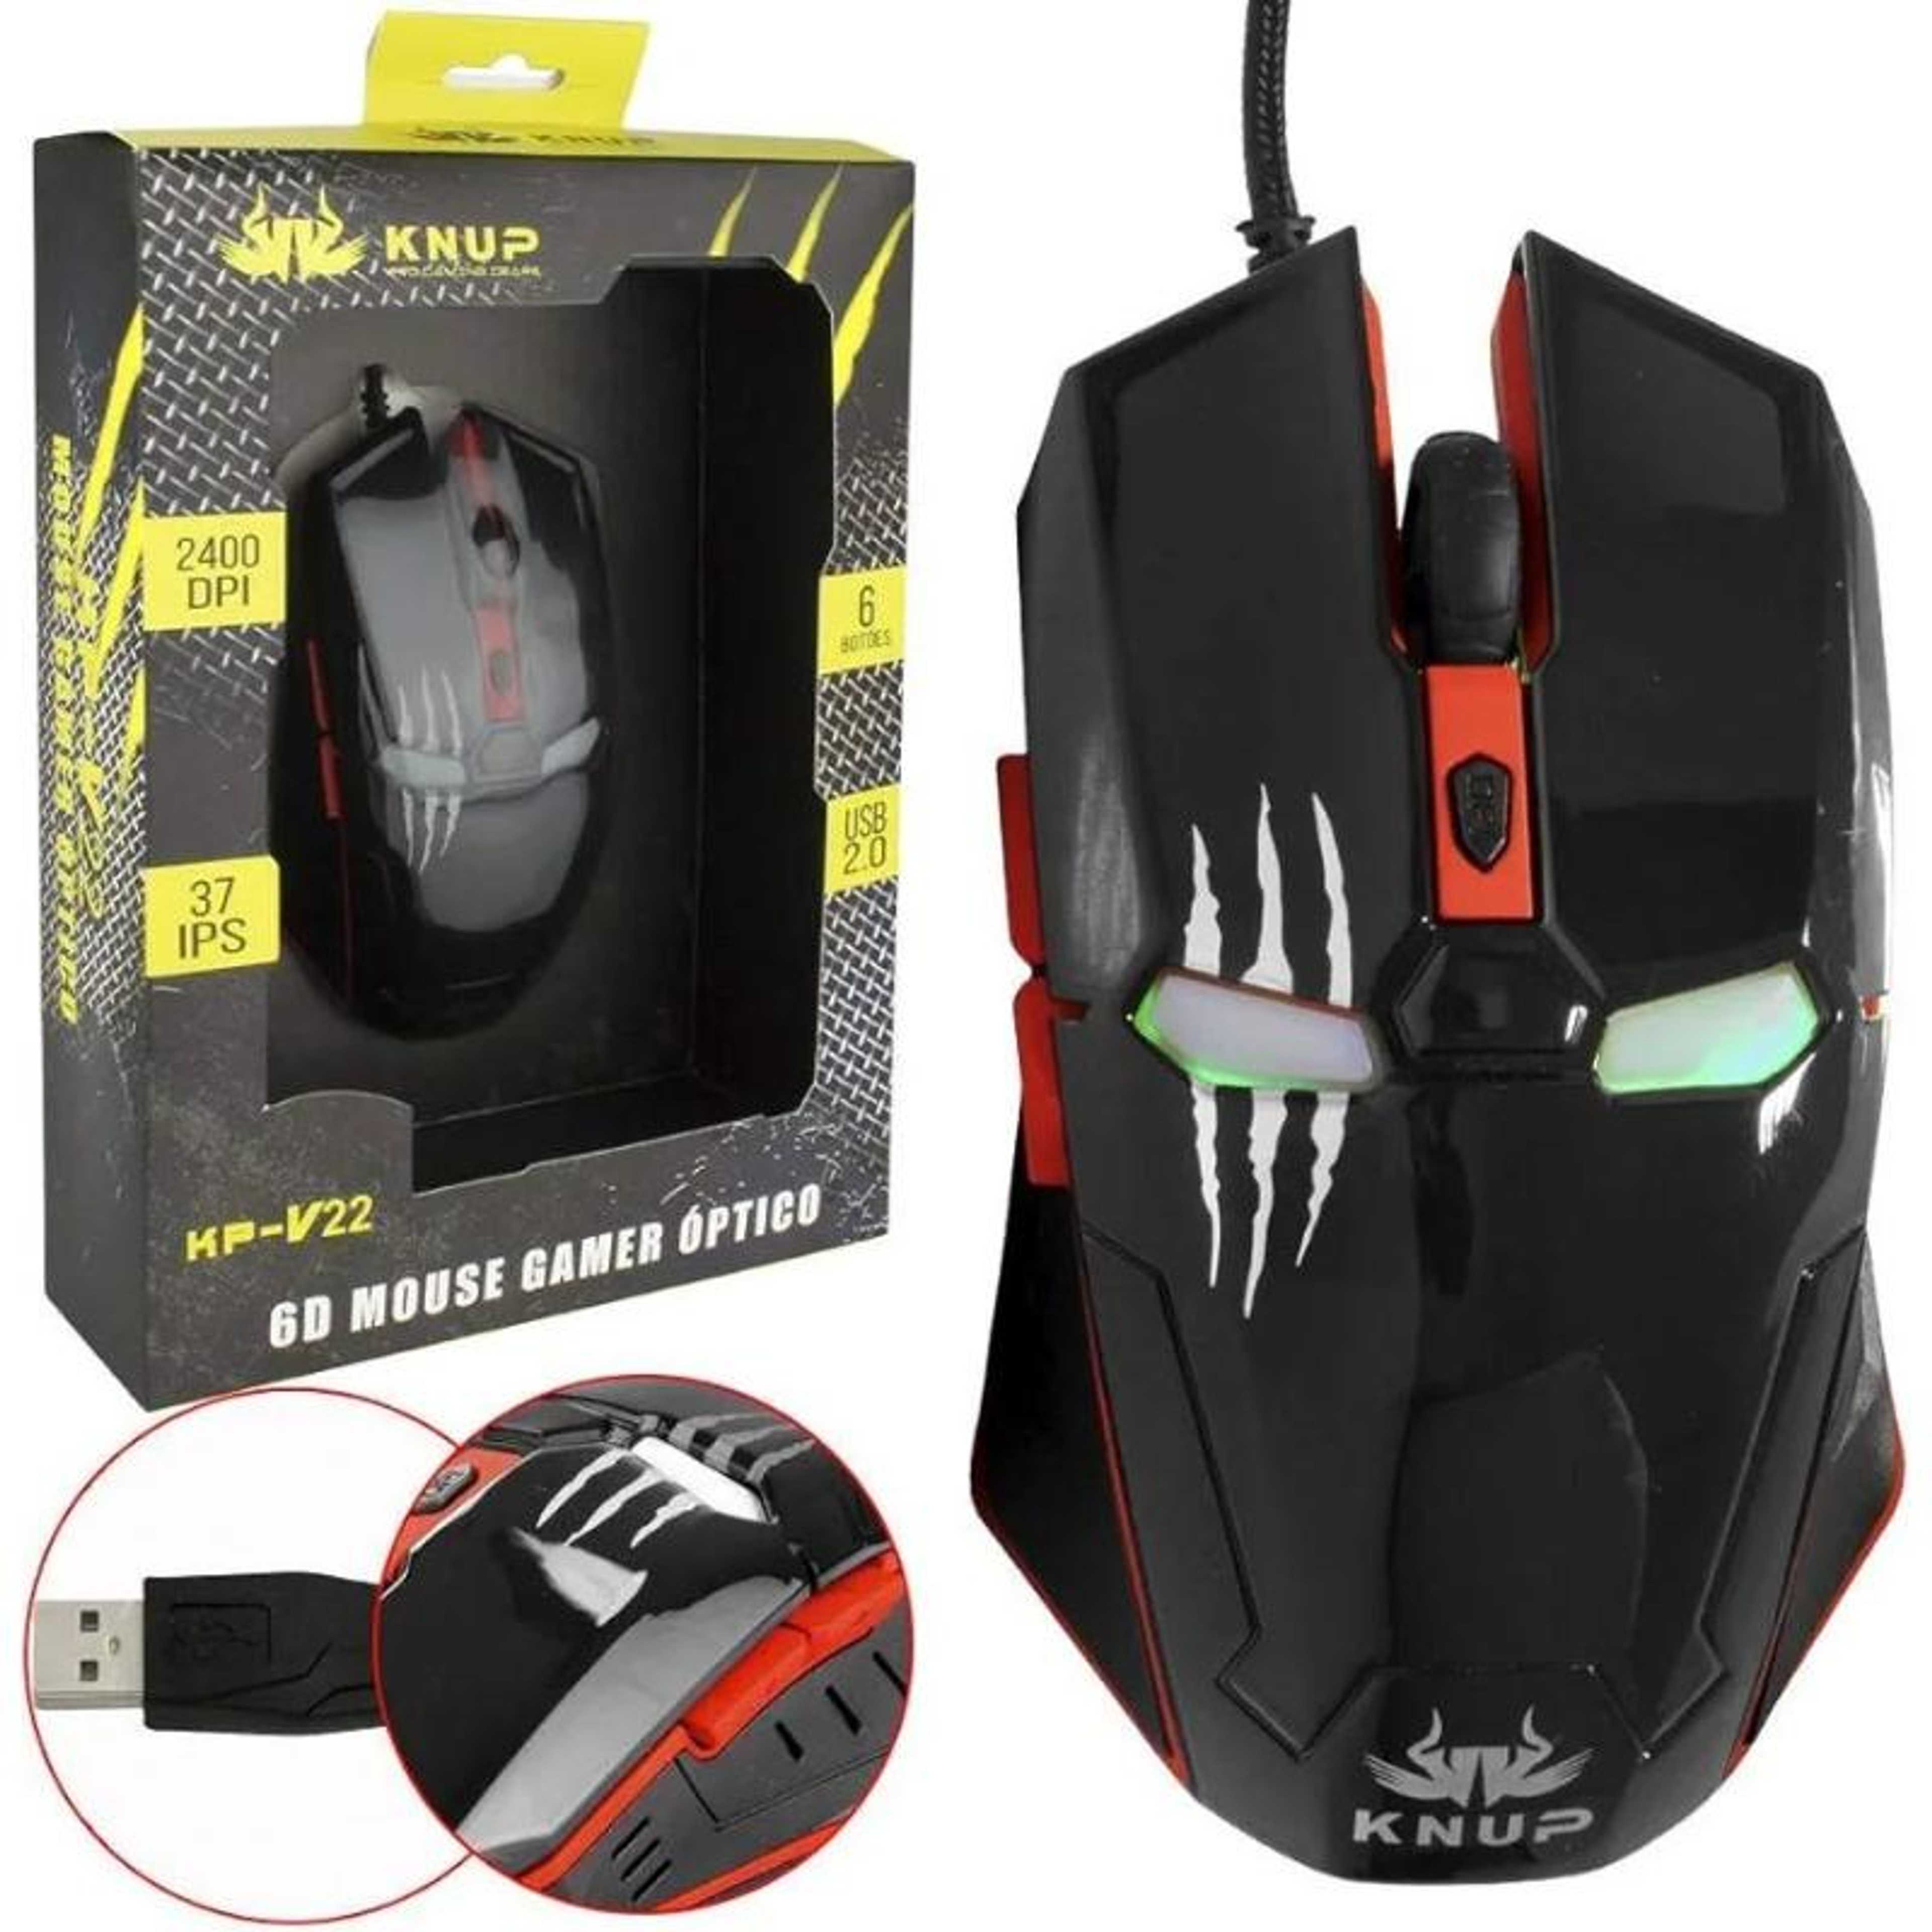 Knup KP-V22 6D Mouse Gamer Optico -IRON MAN with LED 6 buttons- 2400DPI